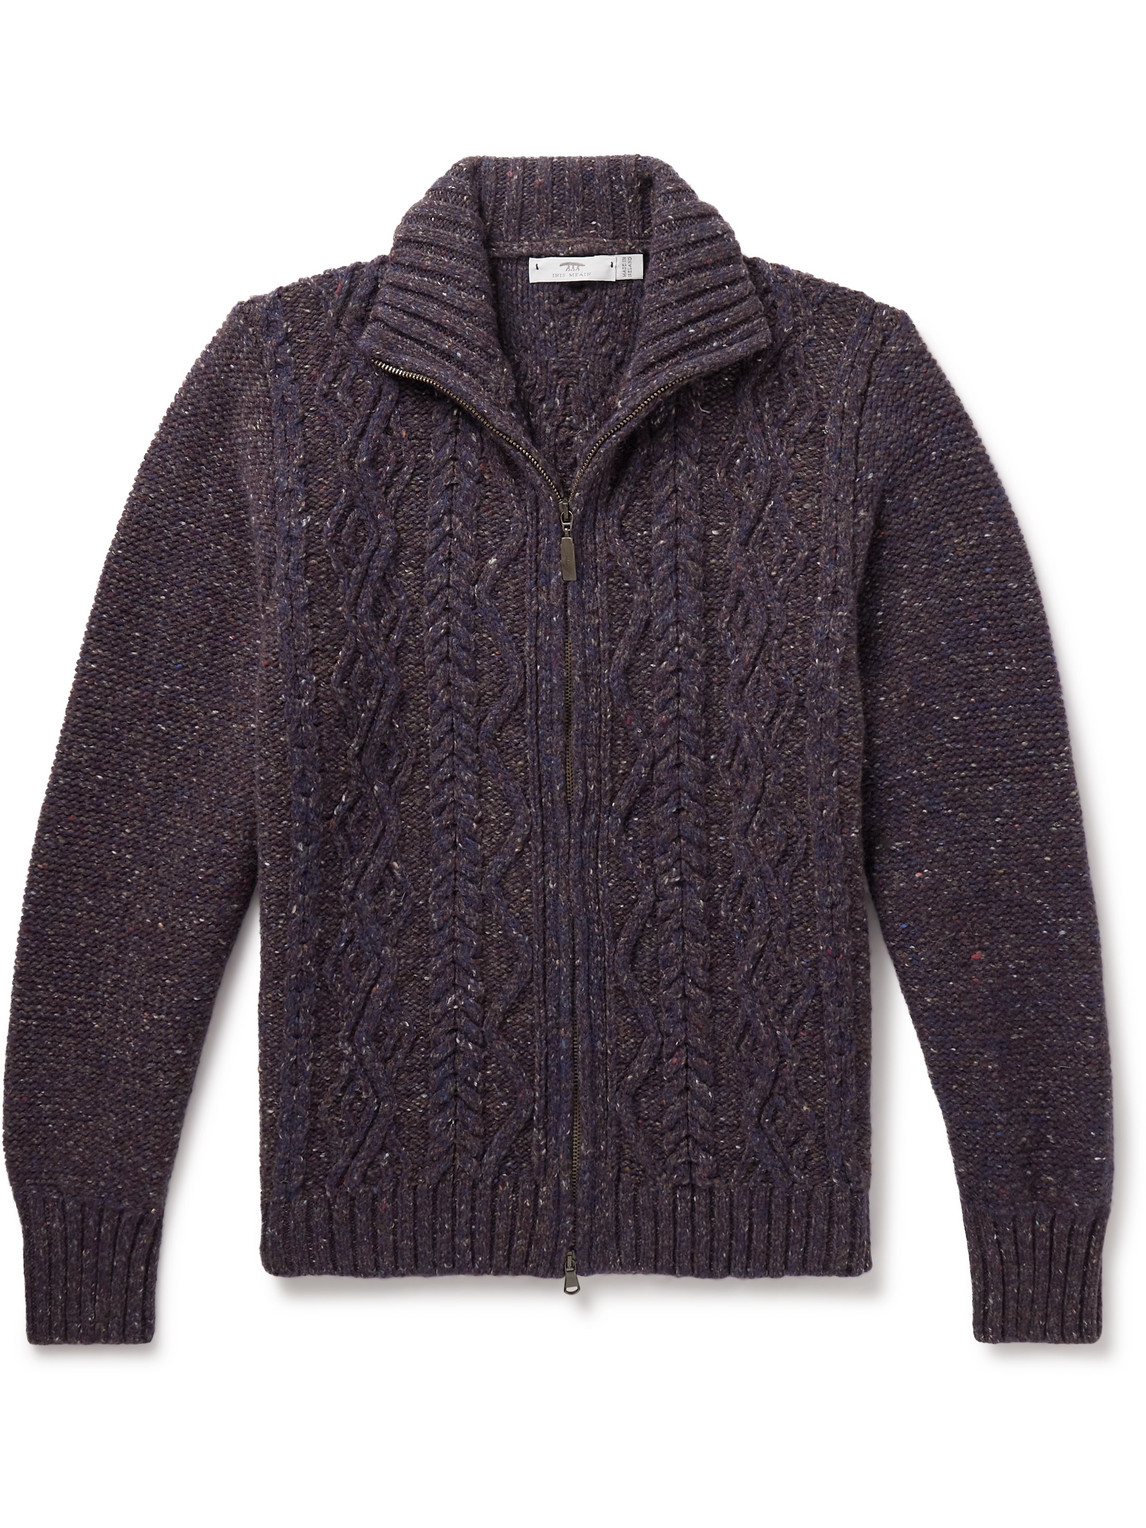 Inis Meáin Cable-Knit Donegal Merino Wool and Cashmere-Blend Zip-Up Cardigan